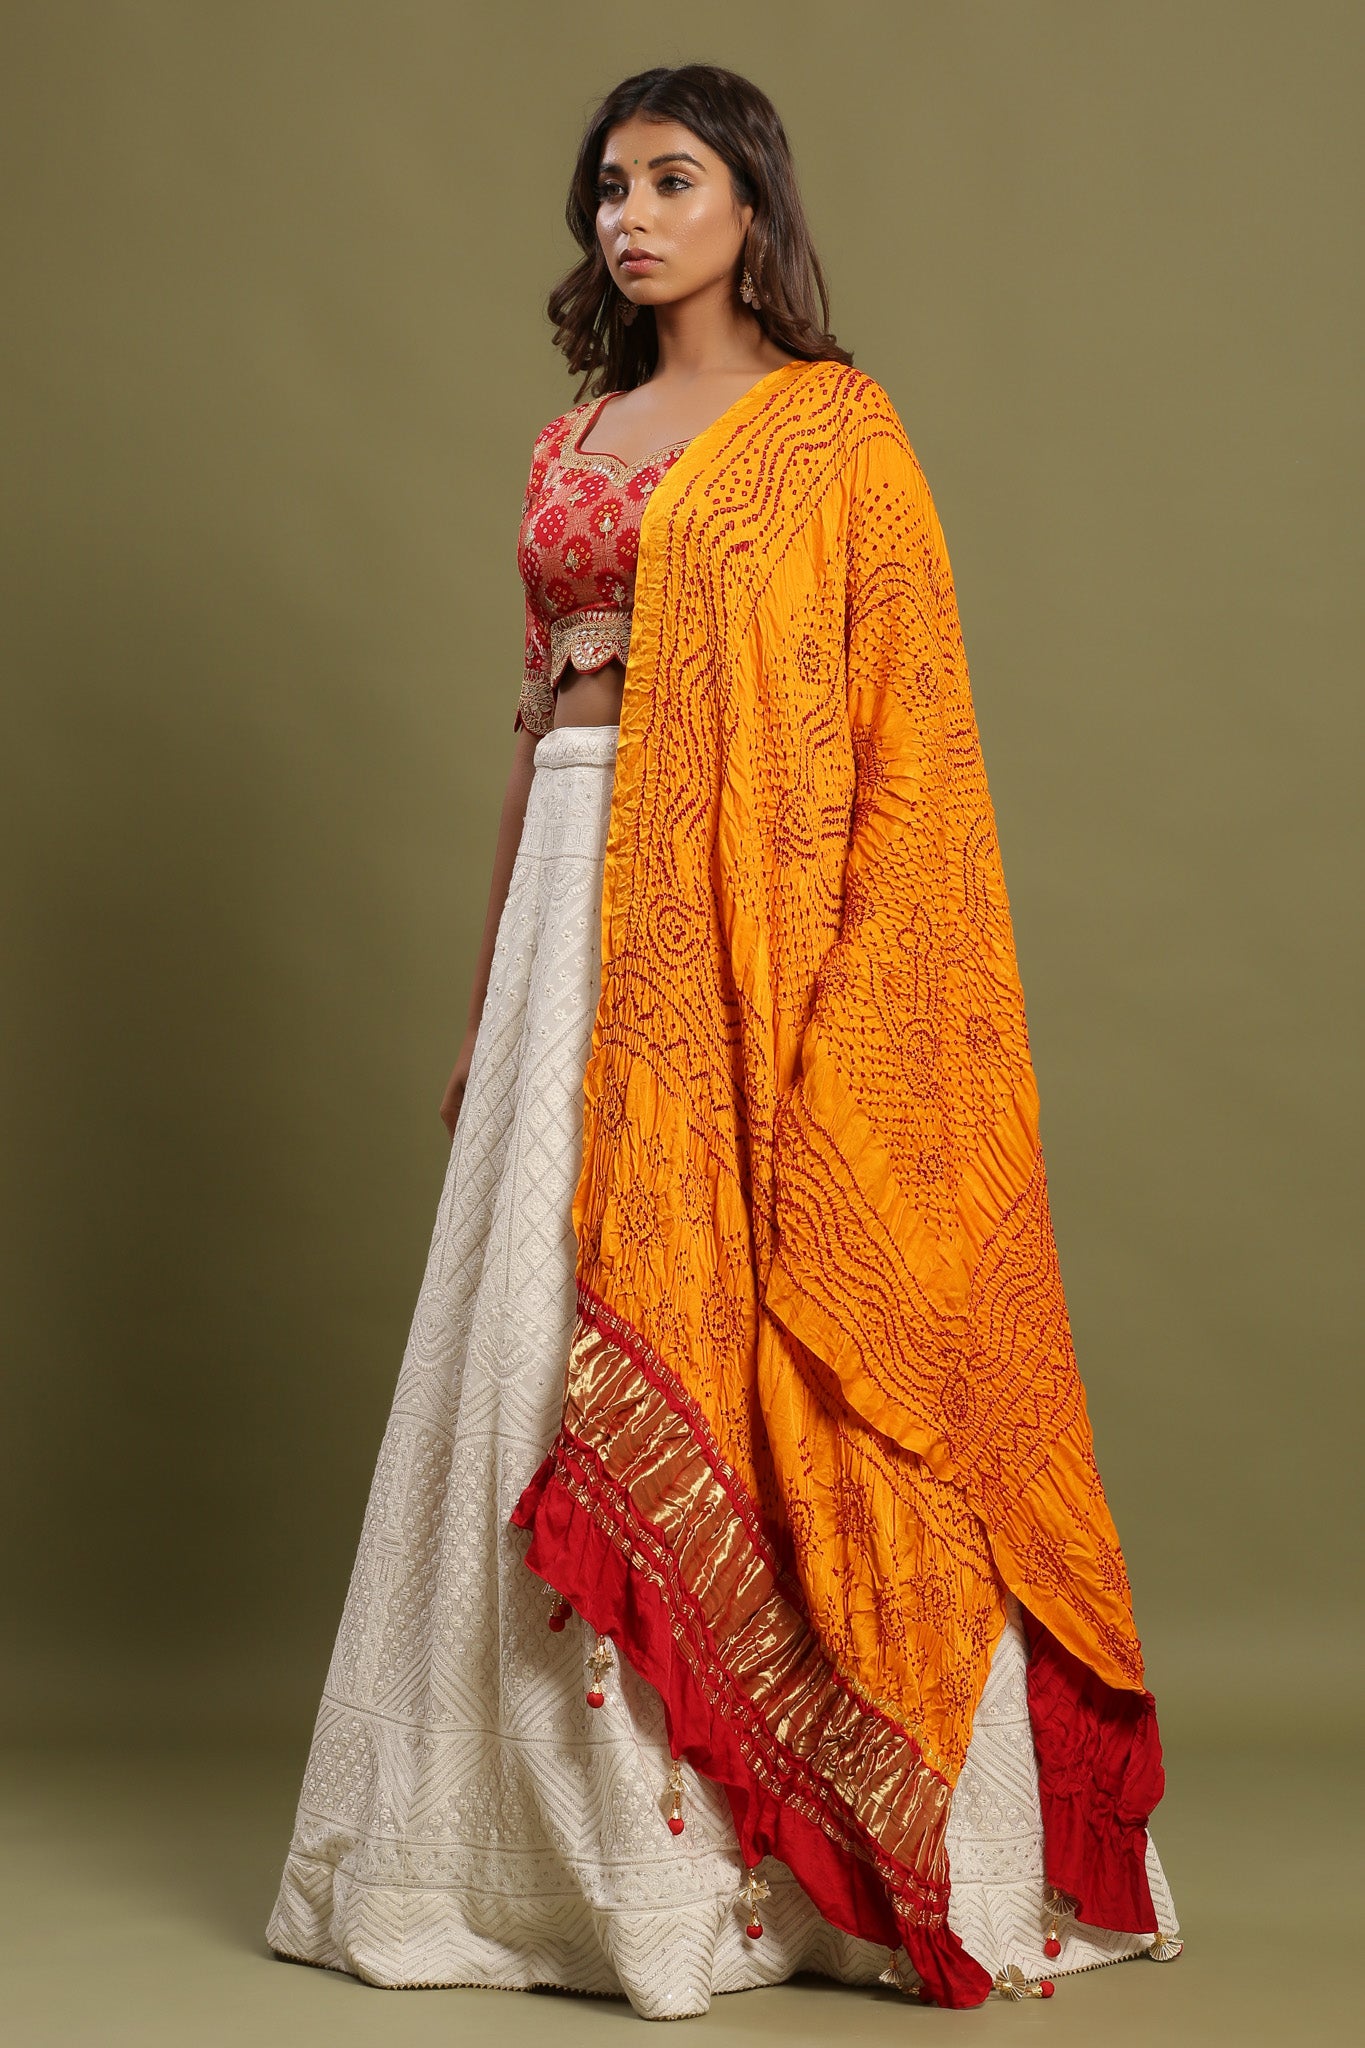 Shop White self-embroidered Zari lehenga set featuring bandhej orange print dupatta and zari & gota patti embroidered red balouse. The lehenga also has a long tassel attached to tie the knot. Pair it with beautiful jewelry to enhance your look. Shop online from Pure Elegance.